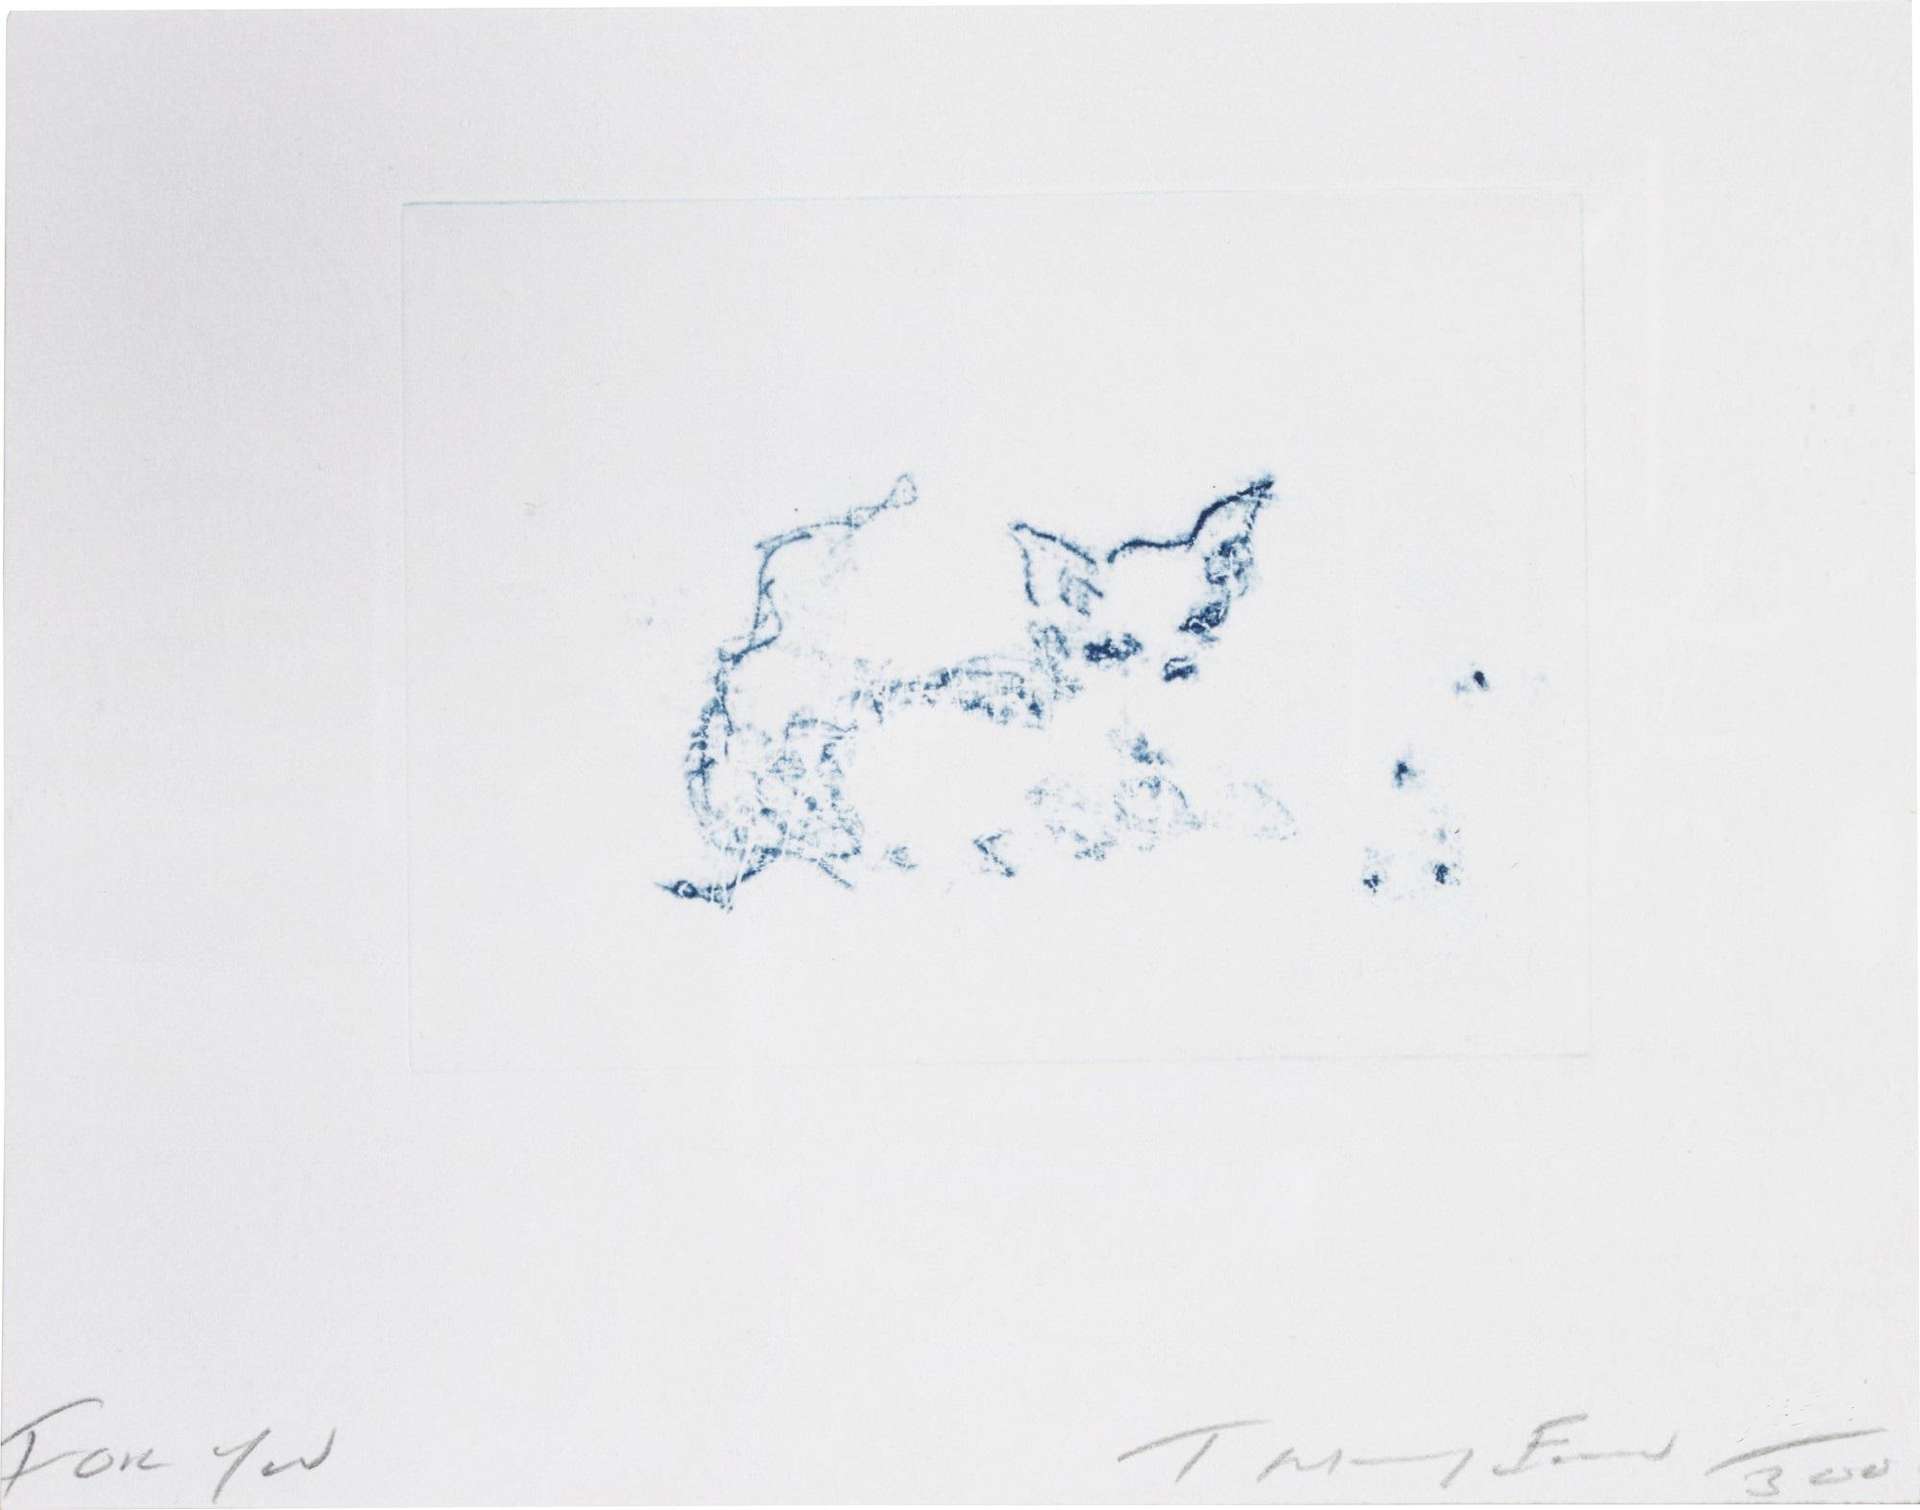 Tracey Emin: For You - Signed Print